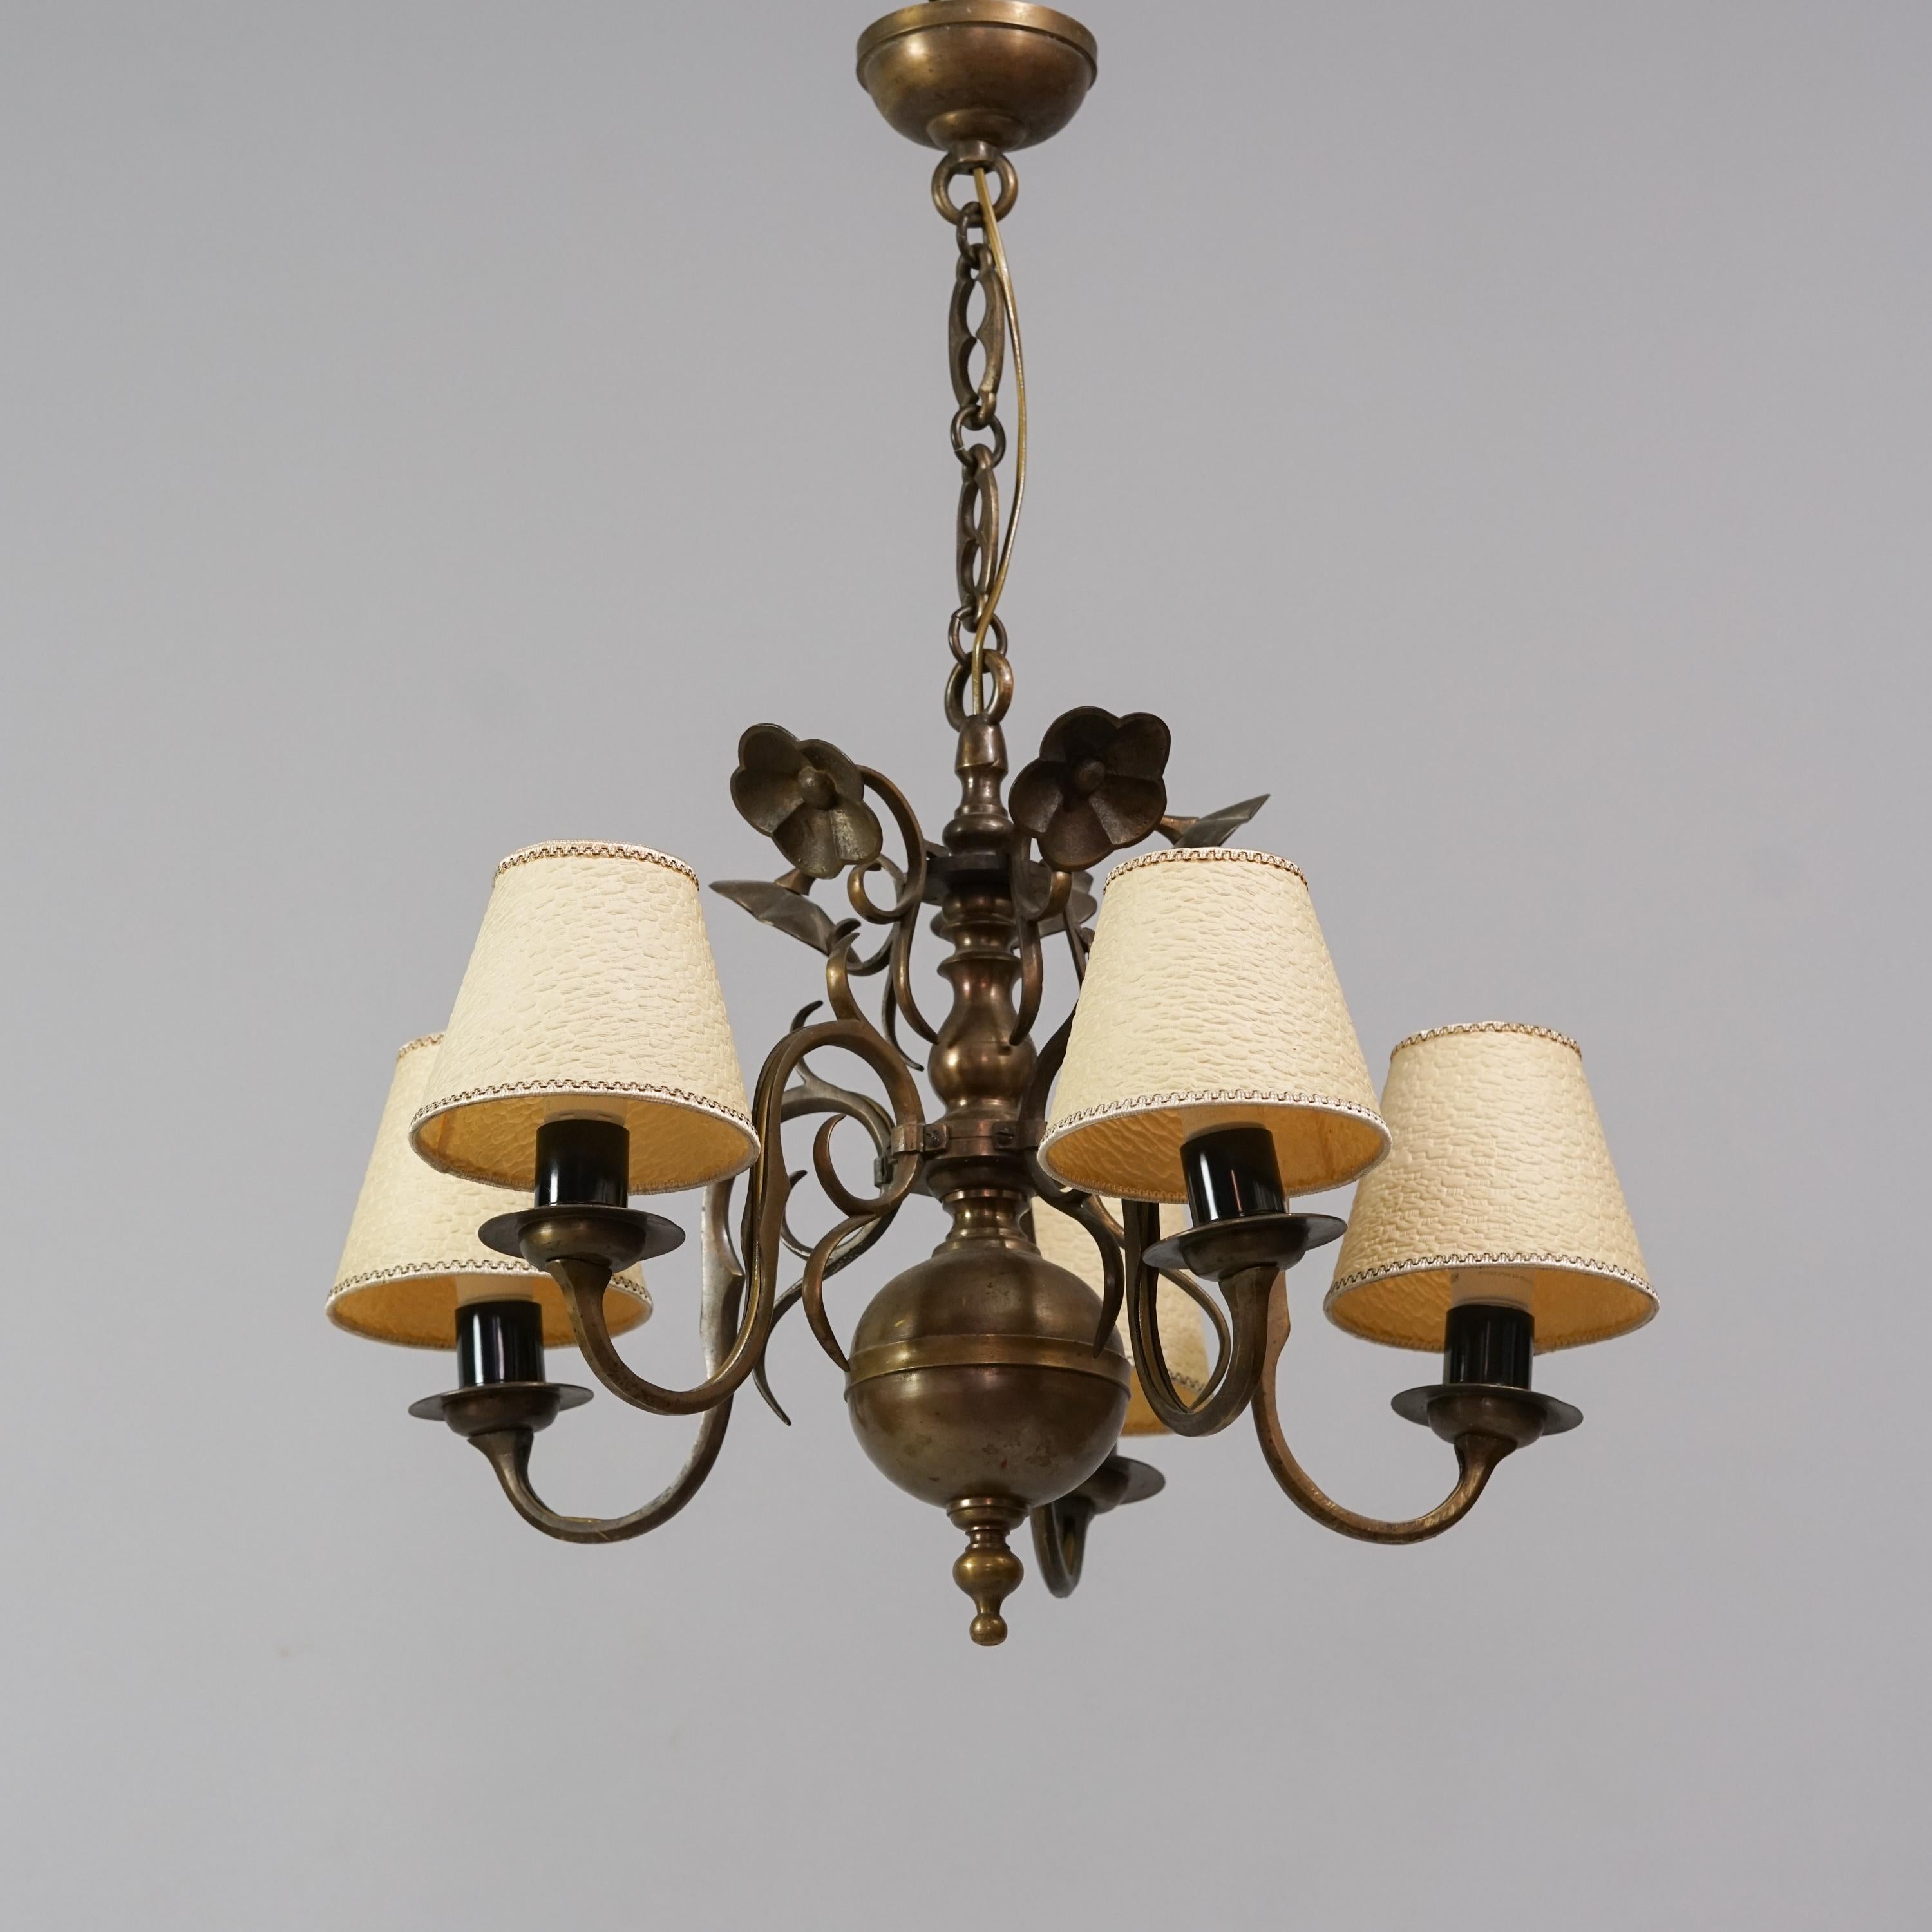 Paavo Tynell model 50488 iron chandelier manufactured by Taito oy from the 1920/1930s. Five paper lampshades. Good vintage condition, minor patina consistent with age and use. Exceedingly rare Paavo Tynell design. Intricate flower details.